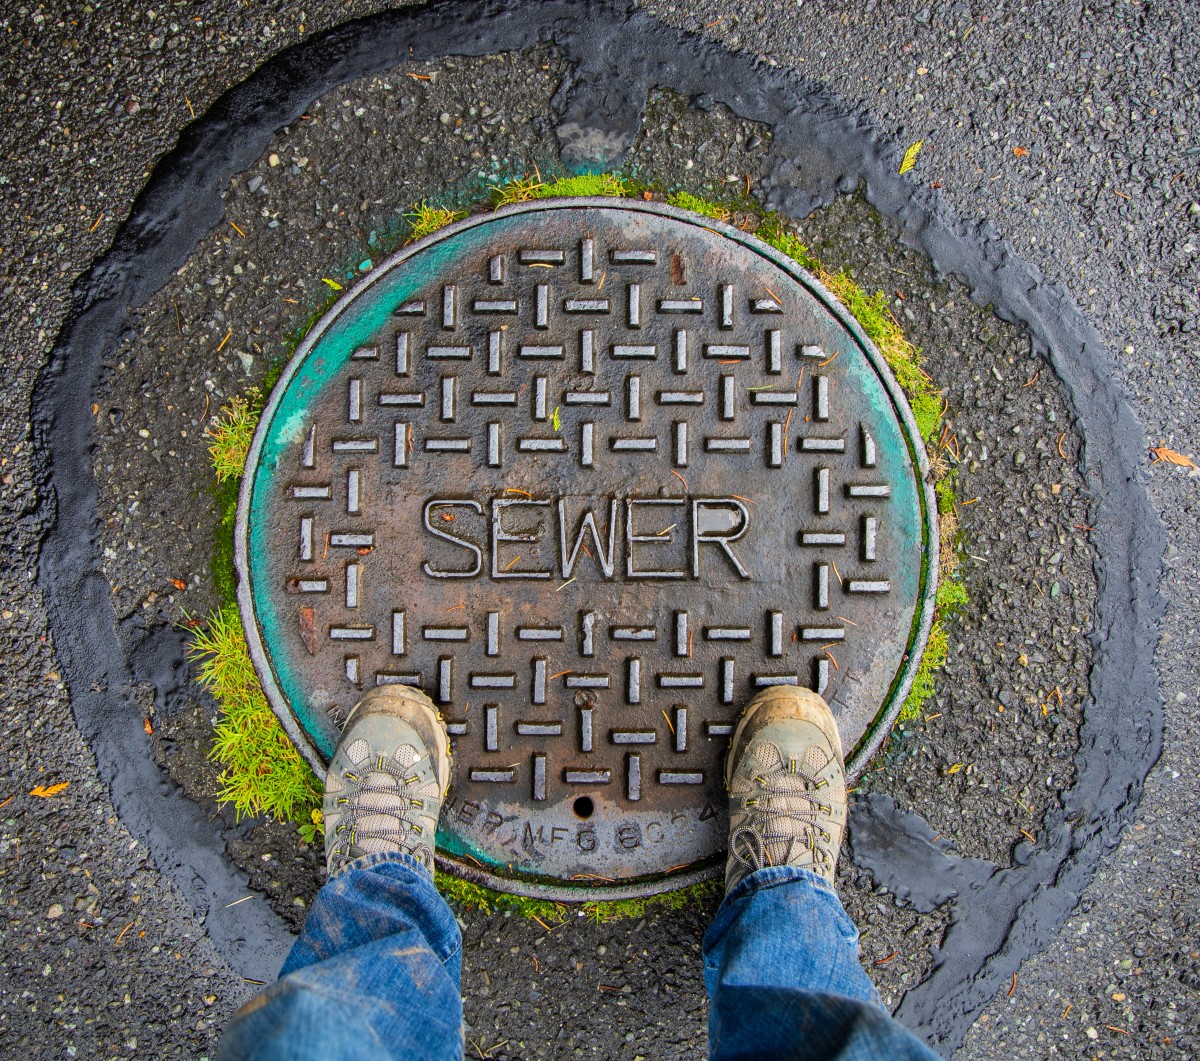 Your city is responsible for problems with the main sewer line.